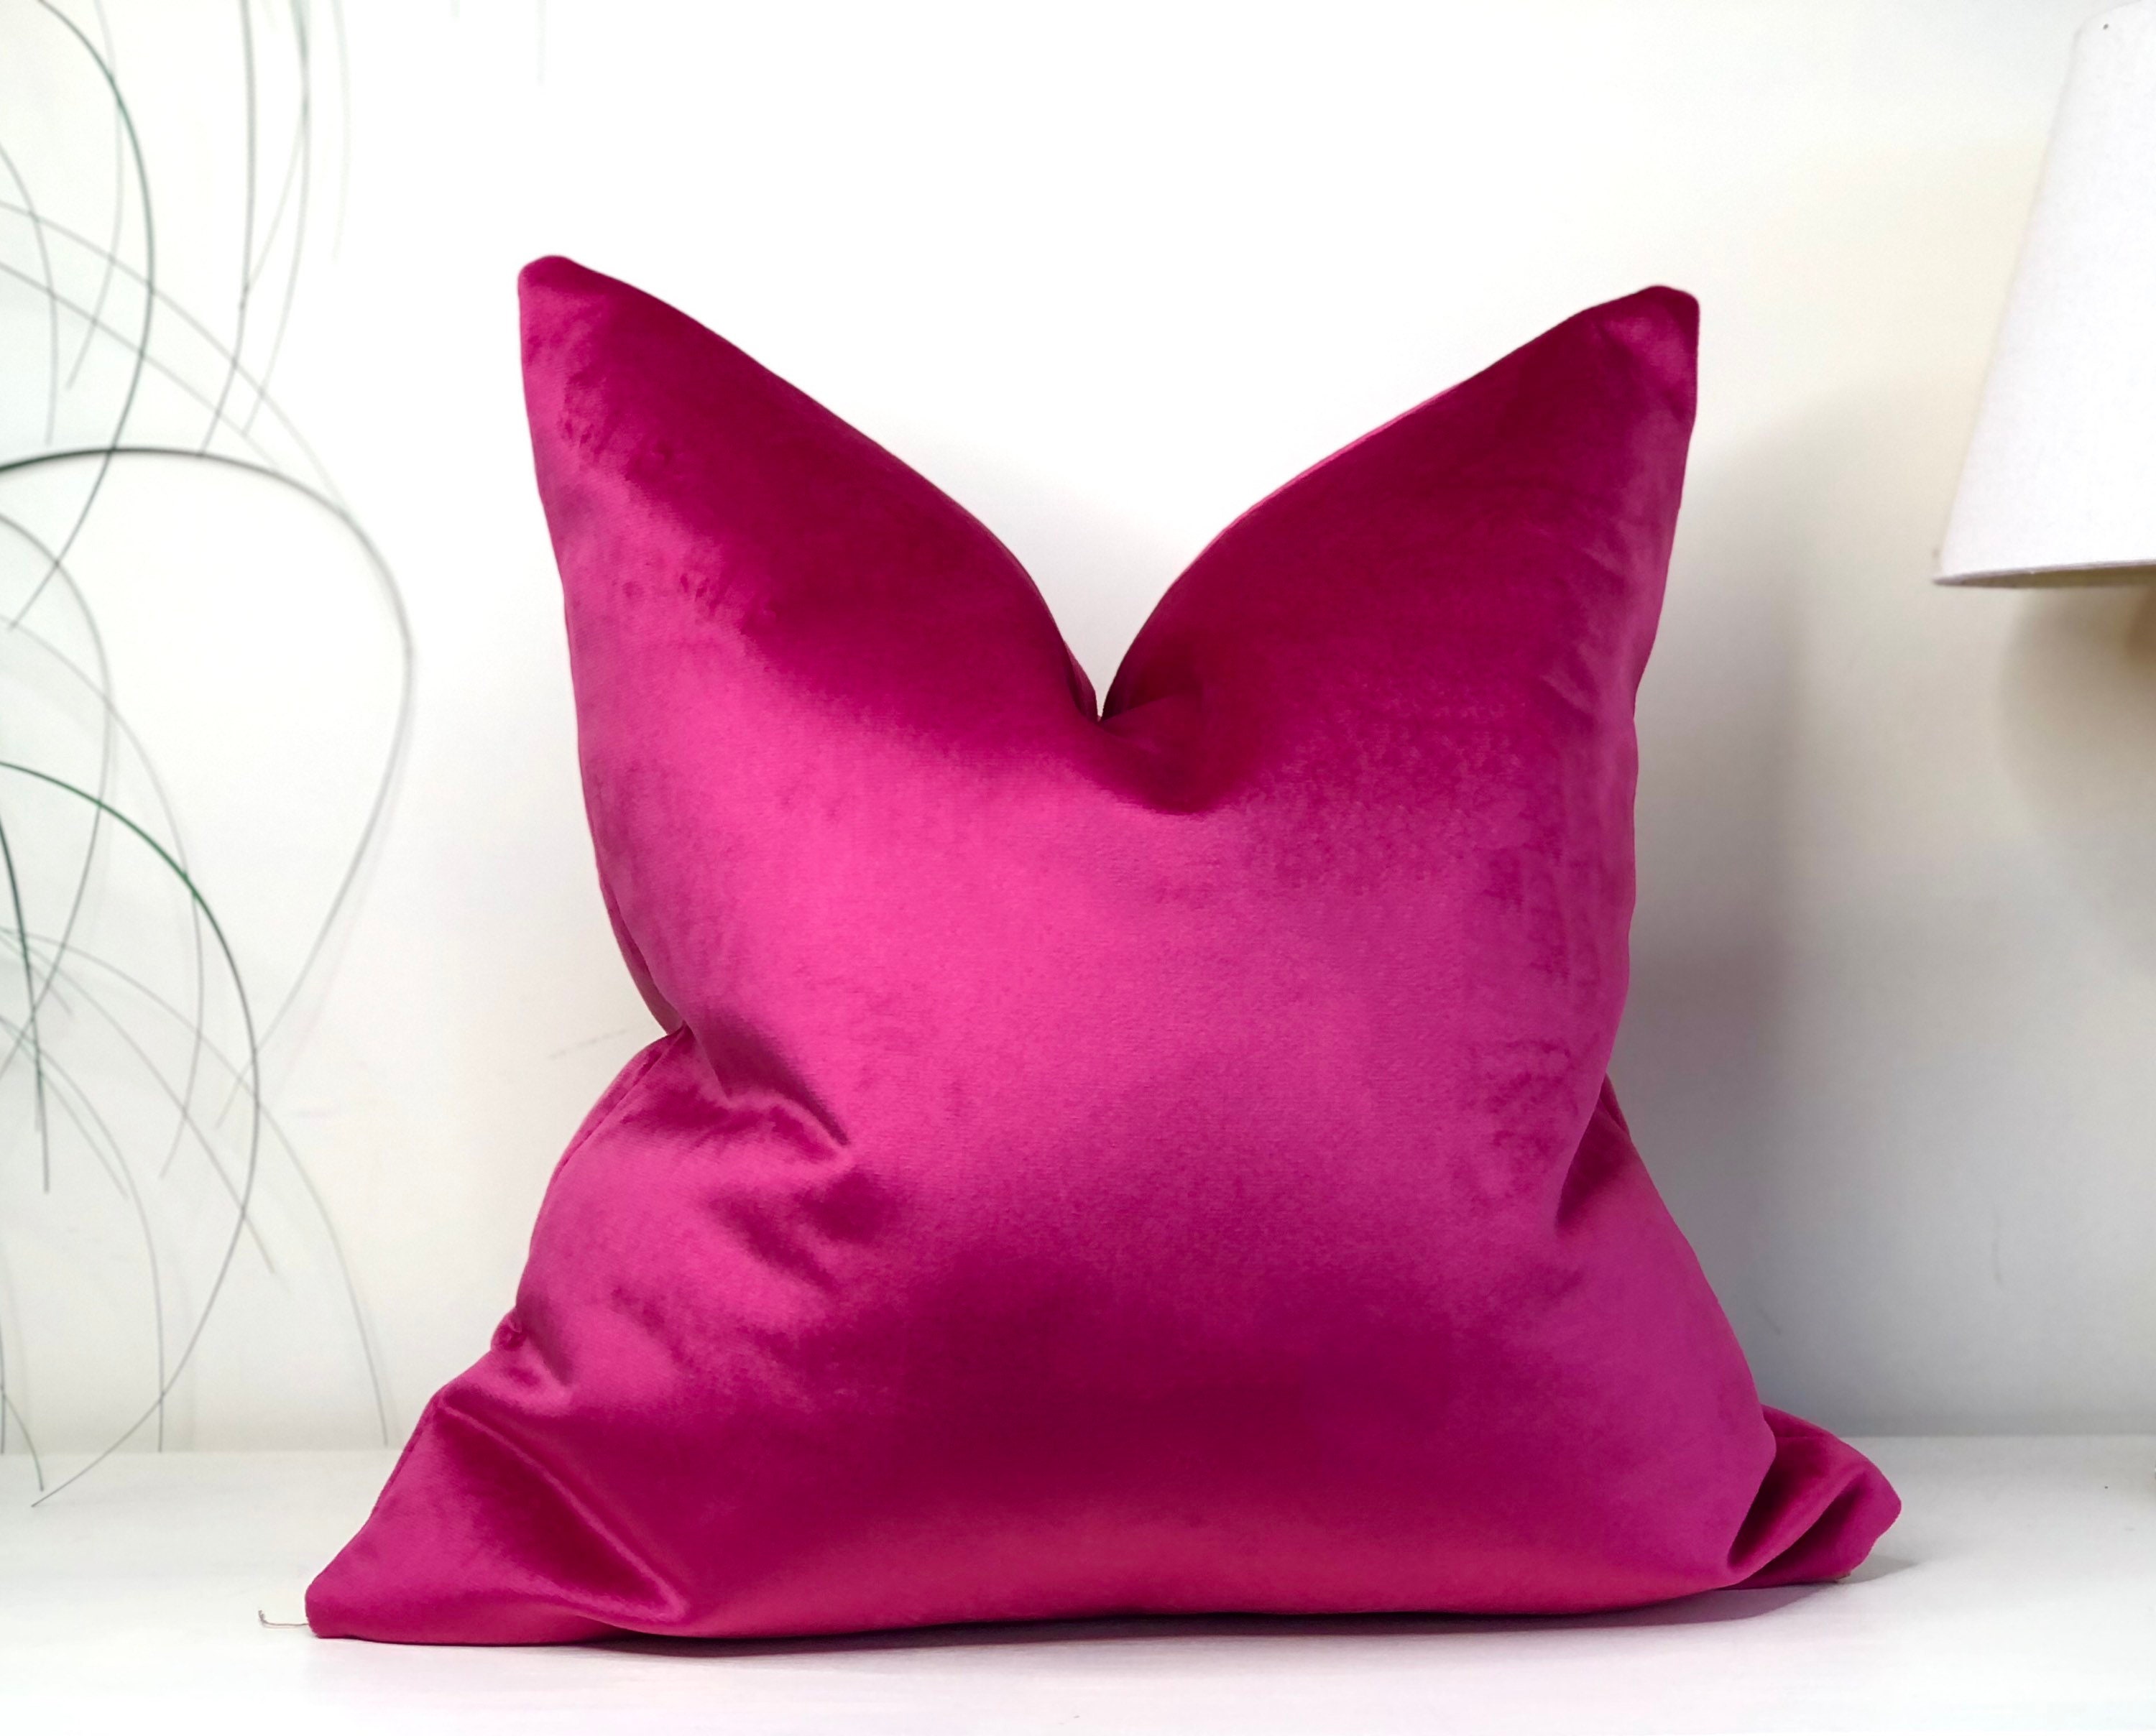 Royal Velvet Pillow in Purple with Gold Trim and Tassels, 16